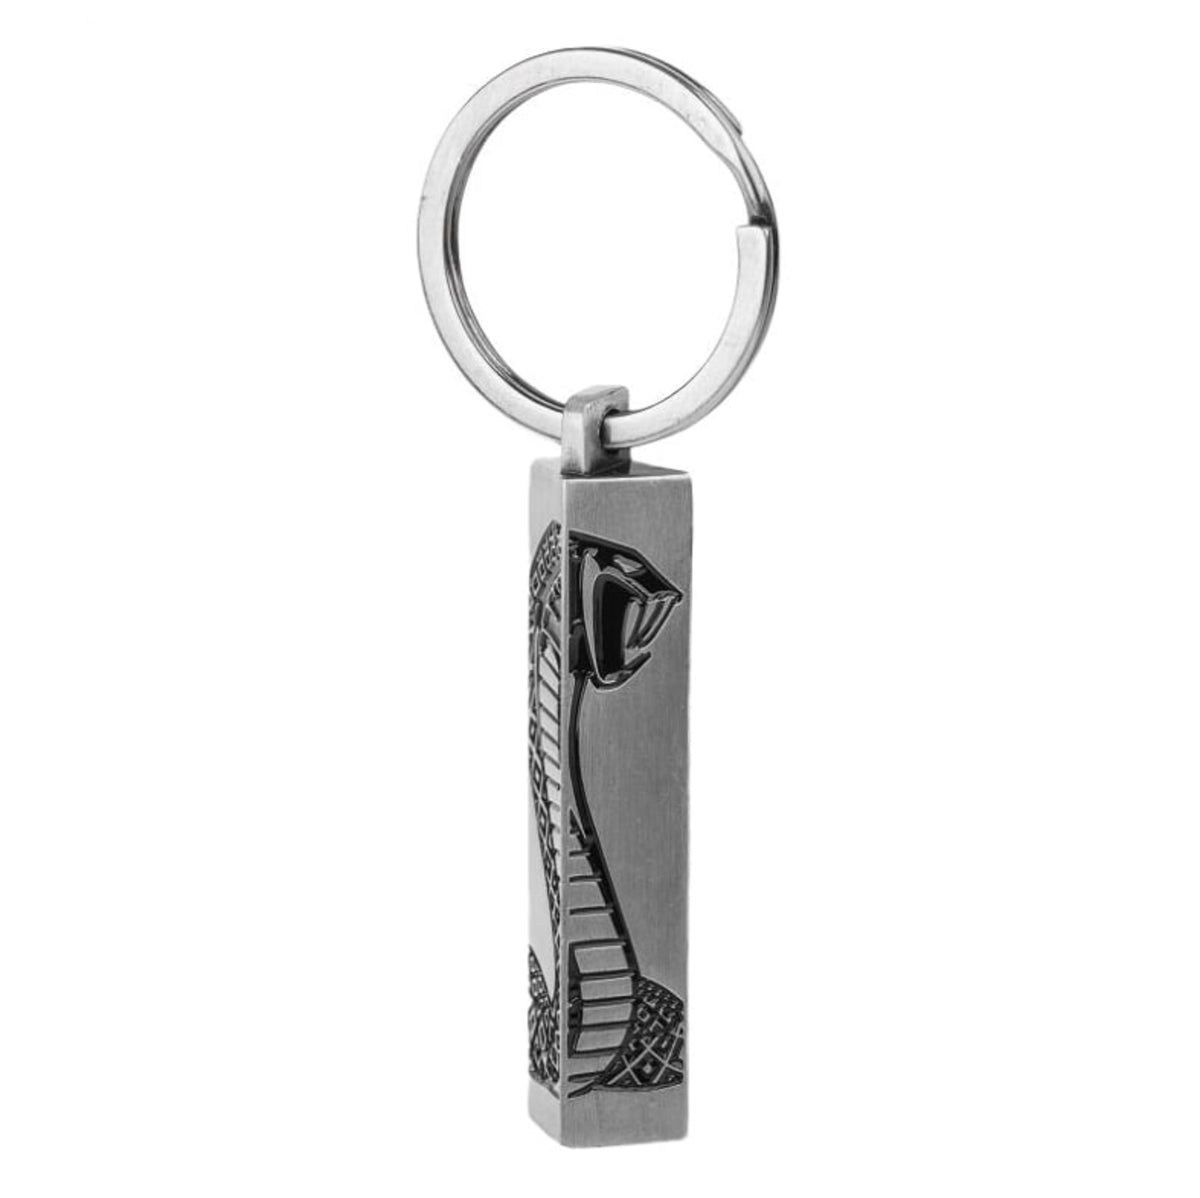 Shelby Racing Round Metal Keychain